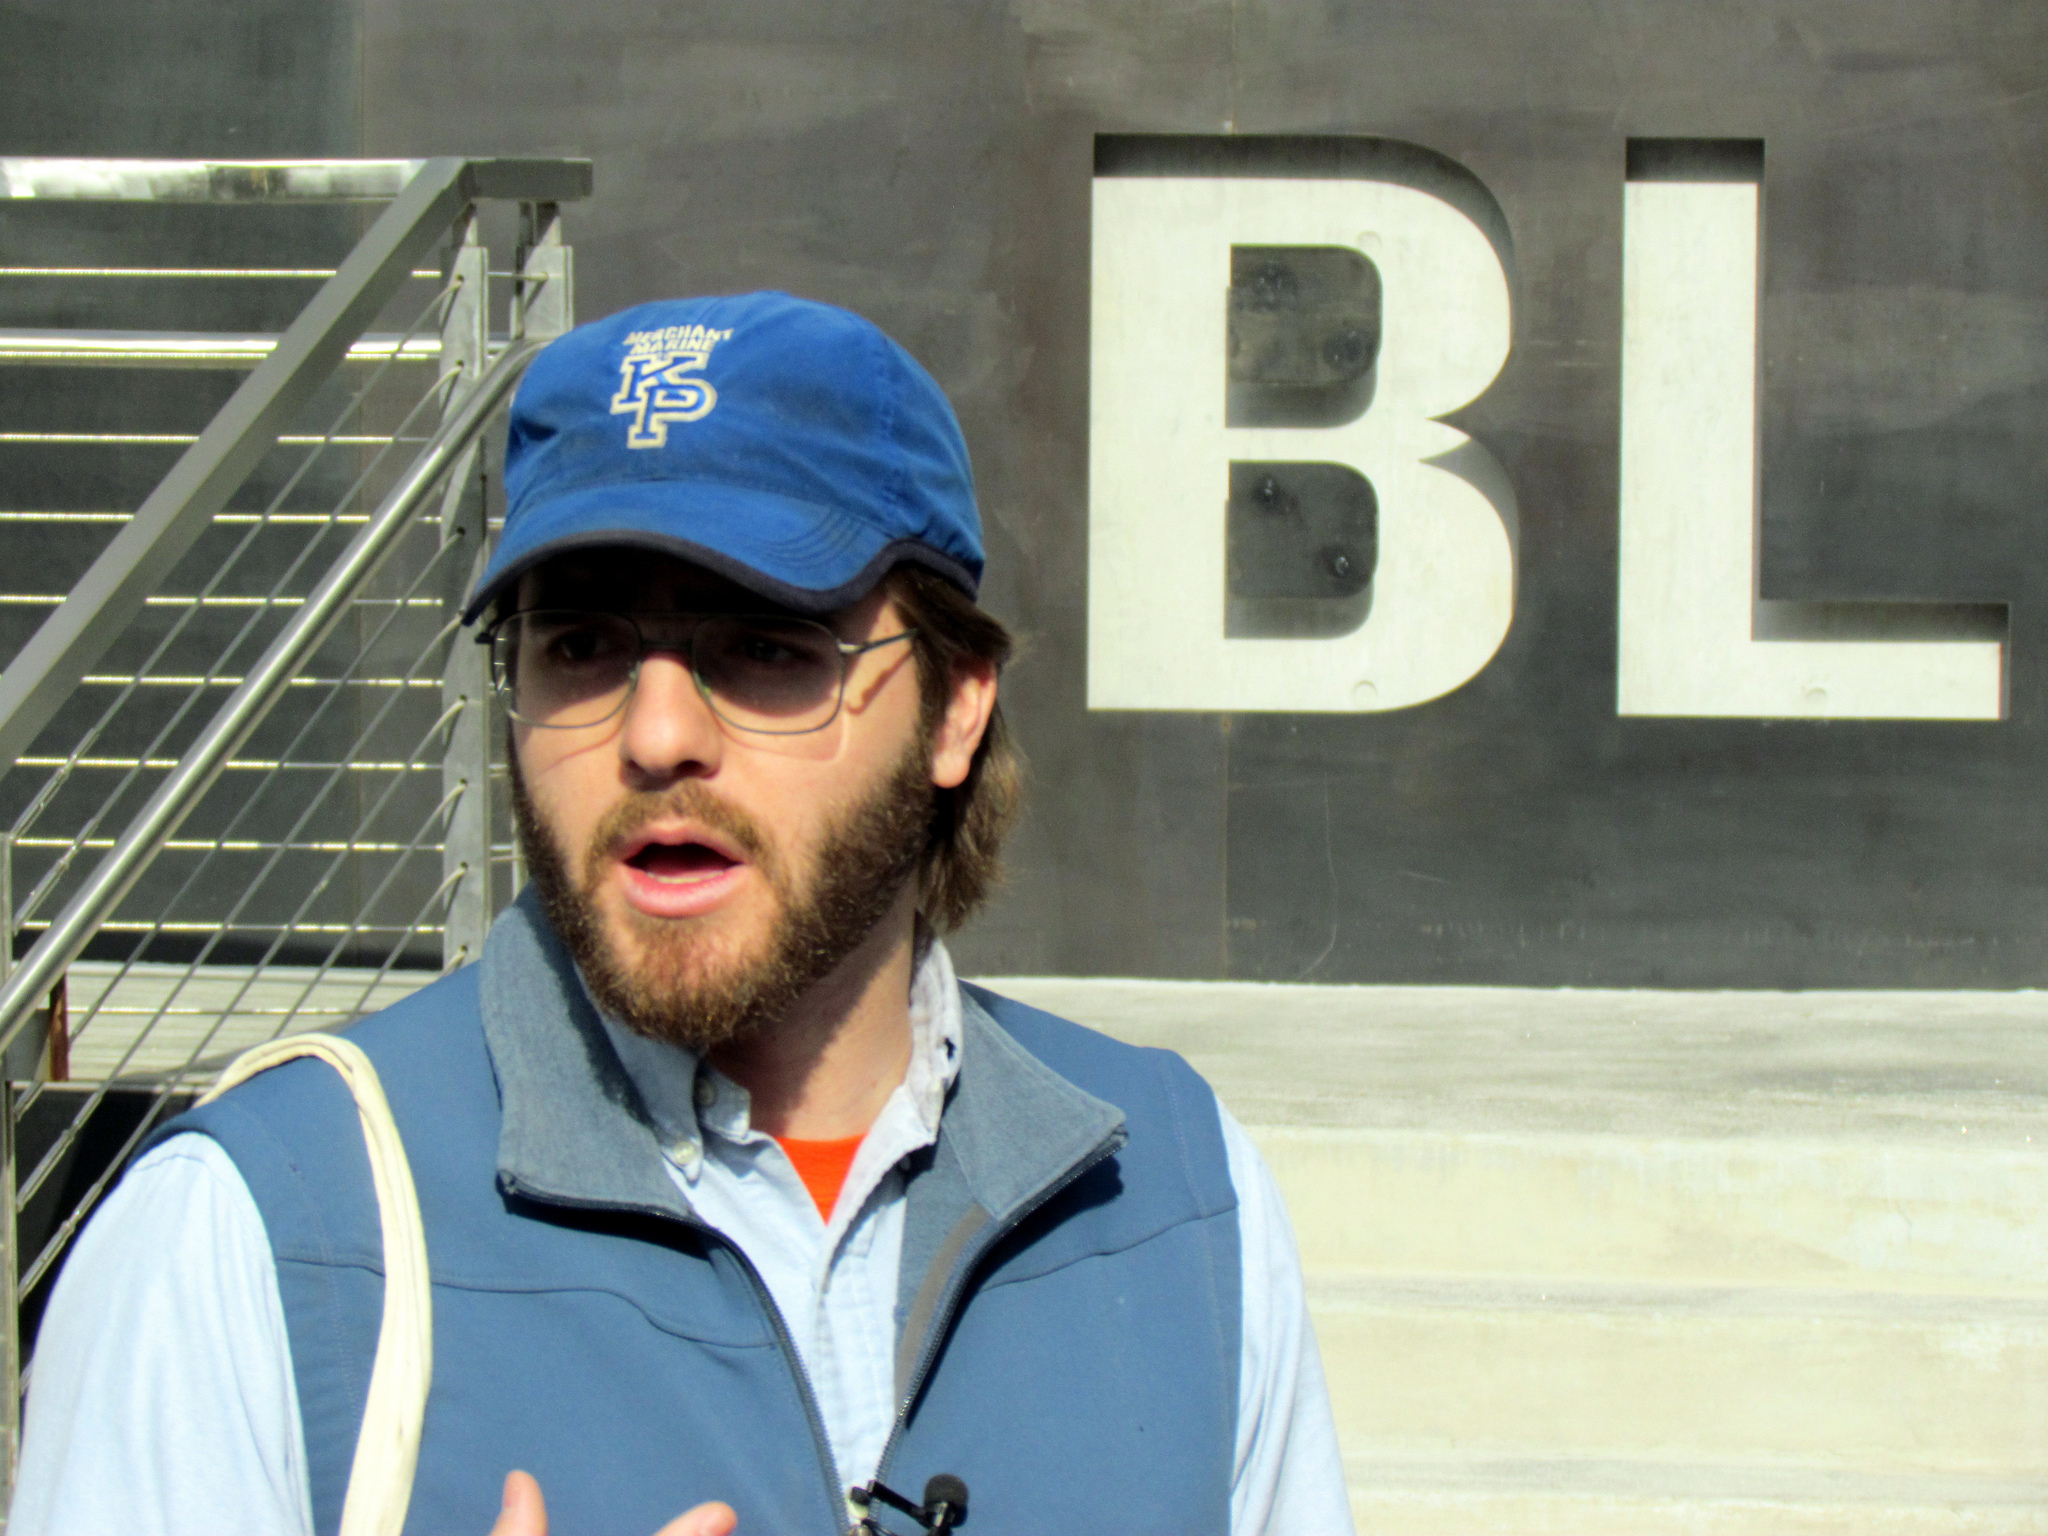 Andrew Gustafson standing outside in front of BLDG 92 museum wearing a hat reading "KP" for Kings Point